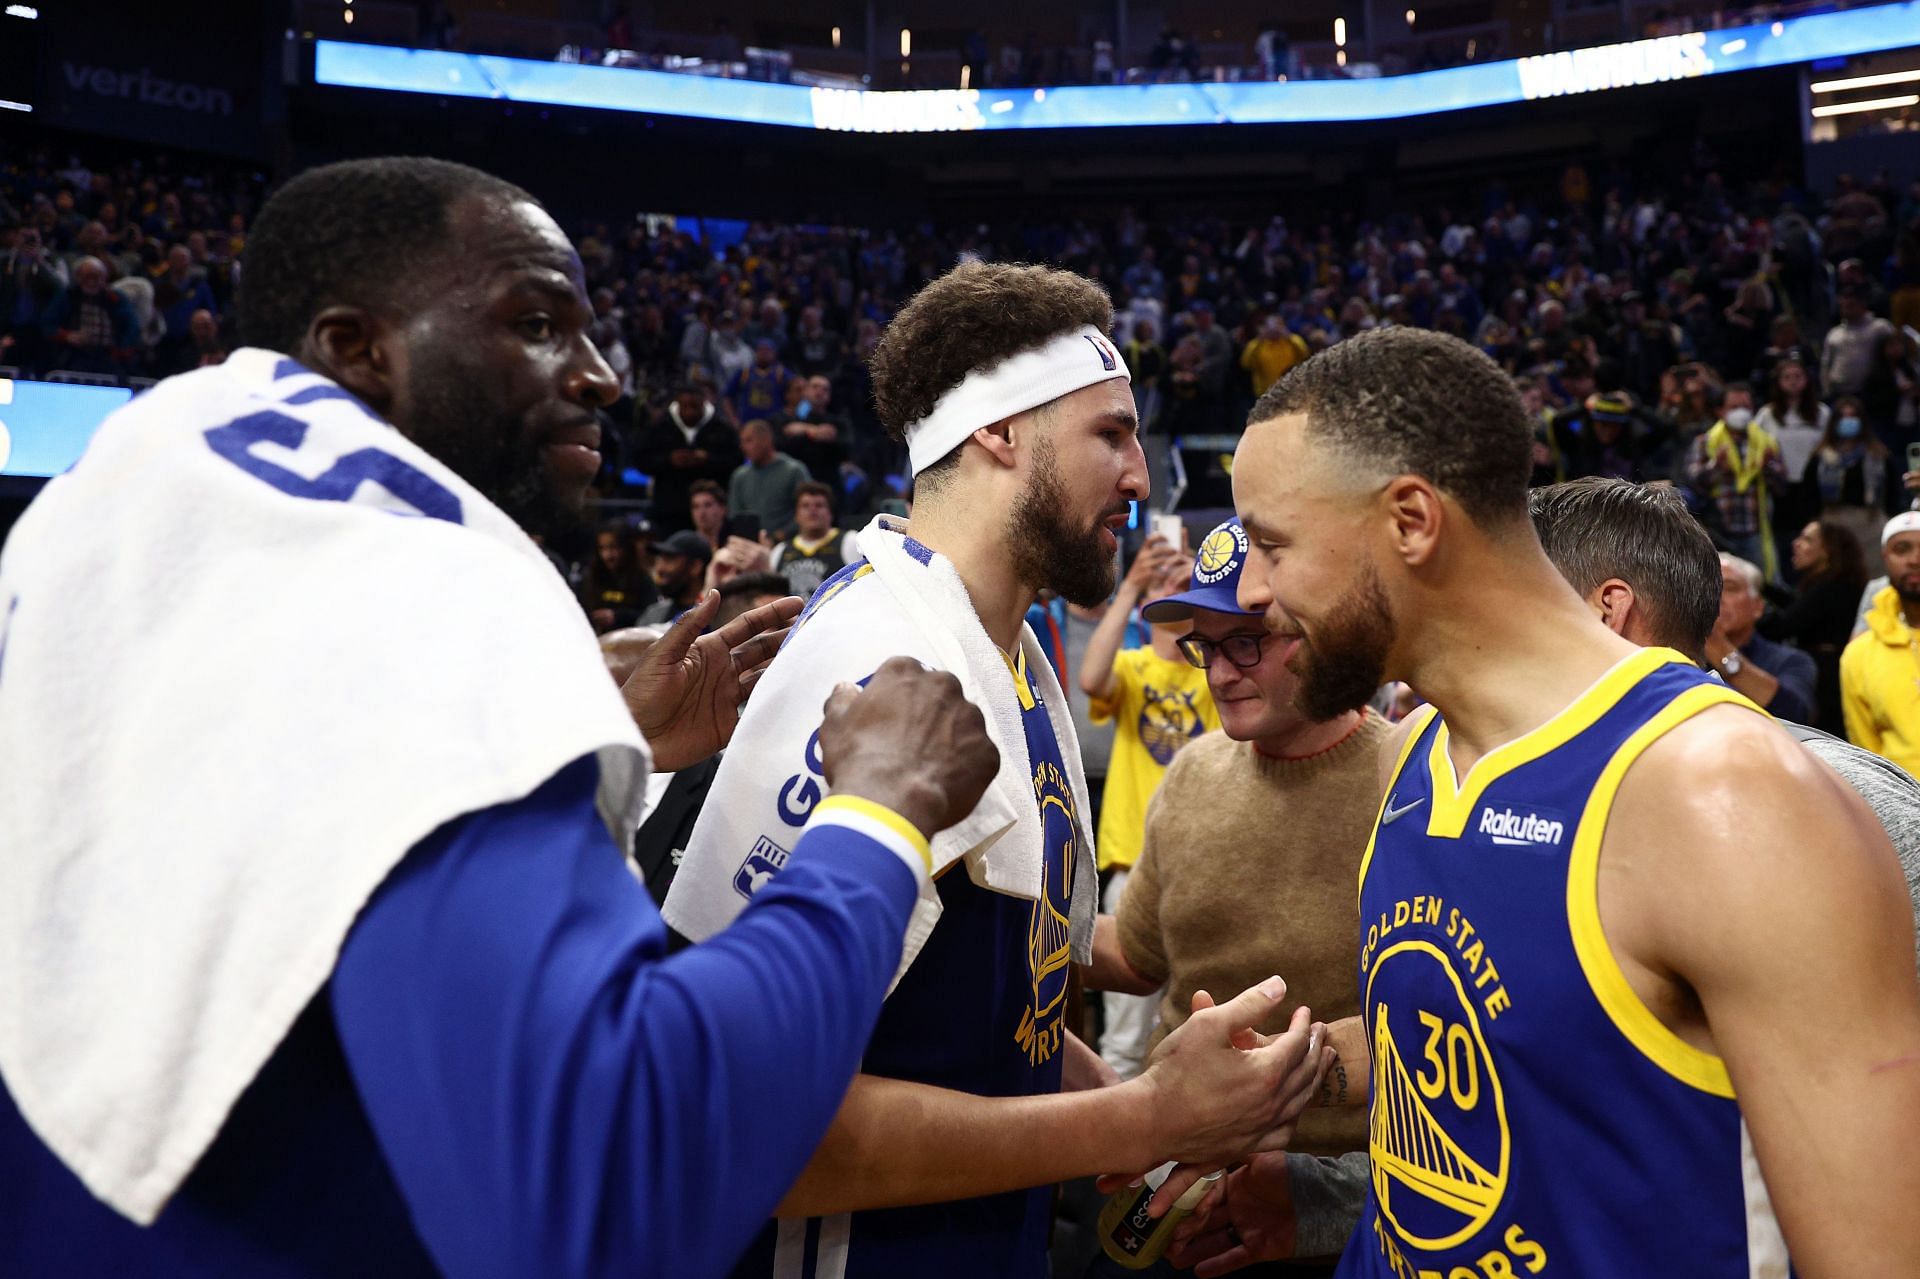 (R-L) Stephen Curry (30), Klay Thompson and &lt;a href=&#039;https://www.sportskeeda.com/player/draymond-green&#039; target=&#039;_blank&#039; rel=&#039;noopener noreferrer&#039;&gt;Draymond Green&lt;/a&gt; of the Golden State Warriors congratulate one another after beating the Washington Wizards on March 14 in San Francisco, California.